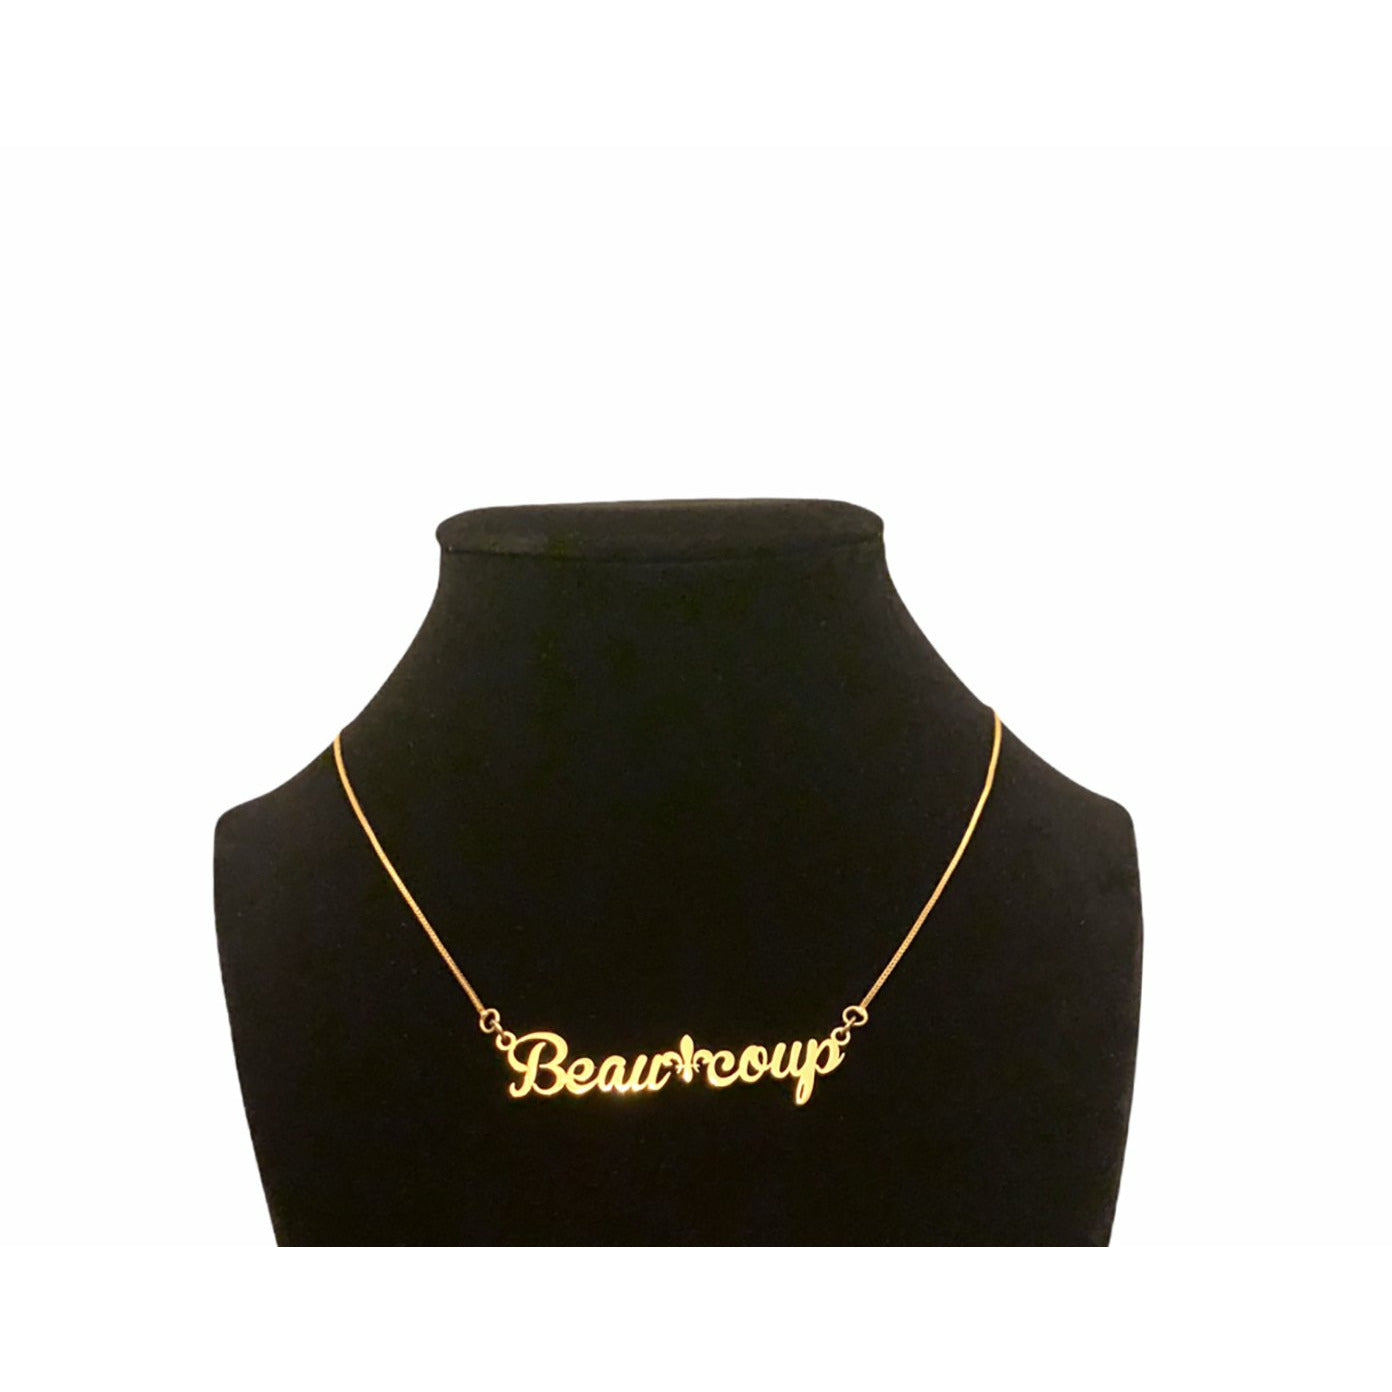 Beaucoup Nameplate Necklace